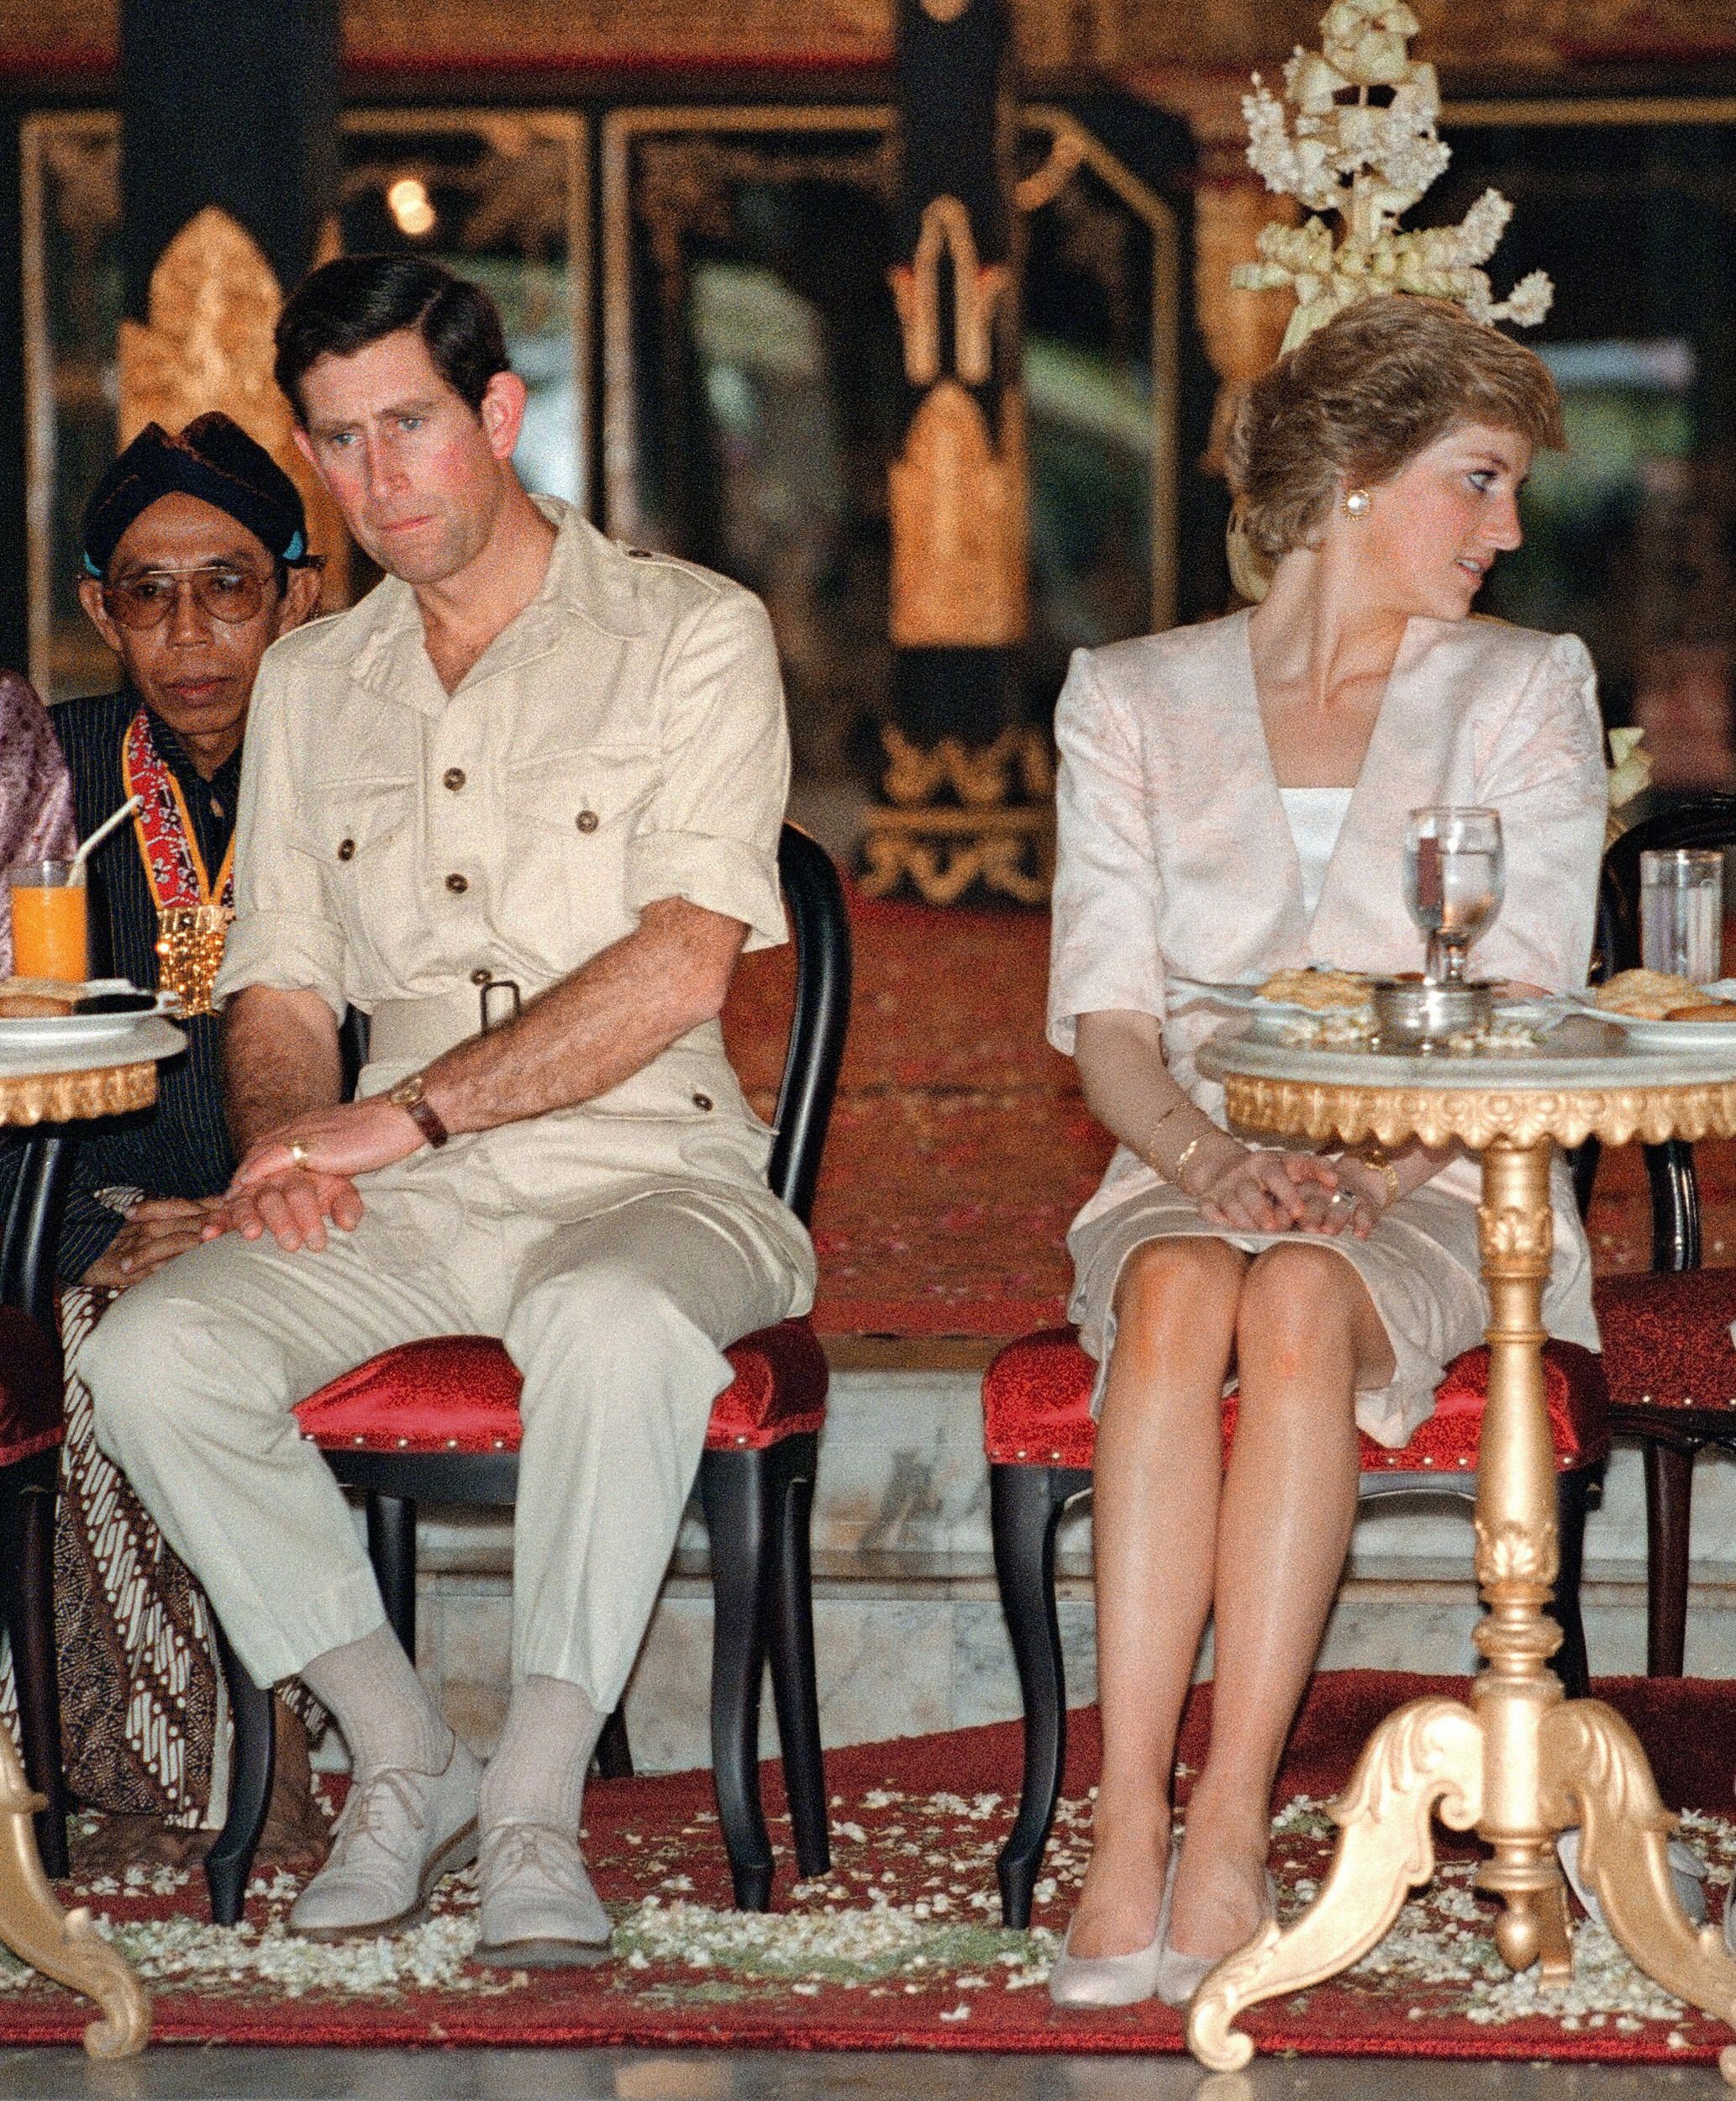 A Look Back At Princess Diana Prince Charles Divorce 19 Years After The Fact Ibtimes